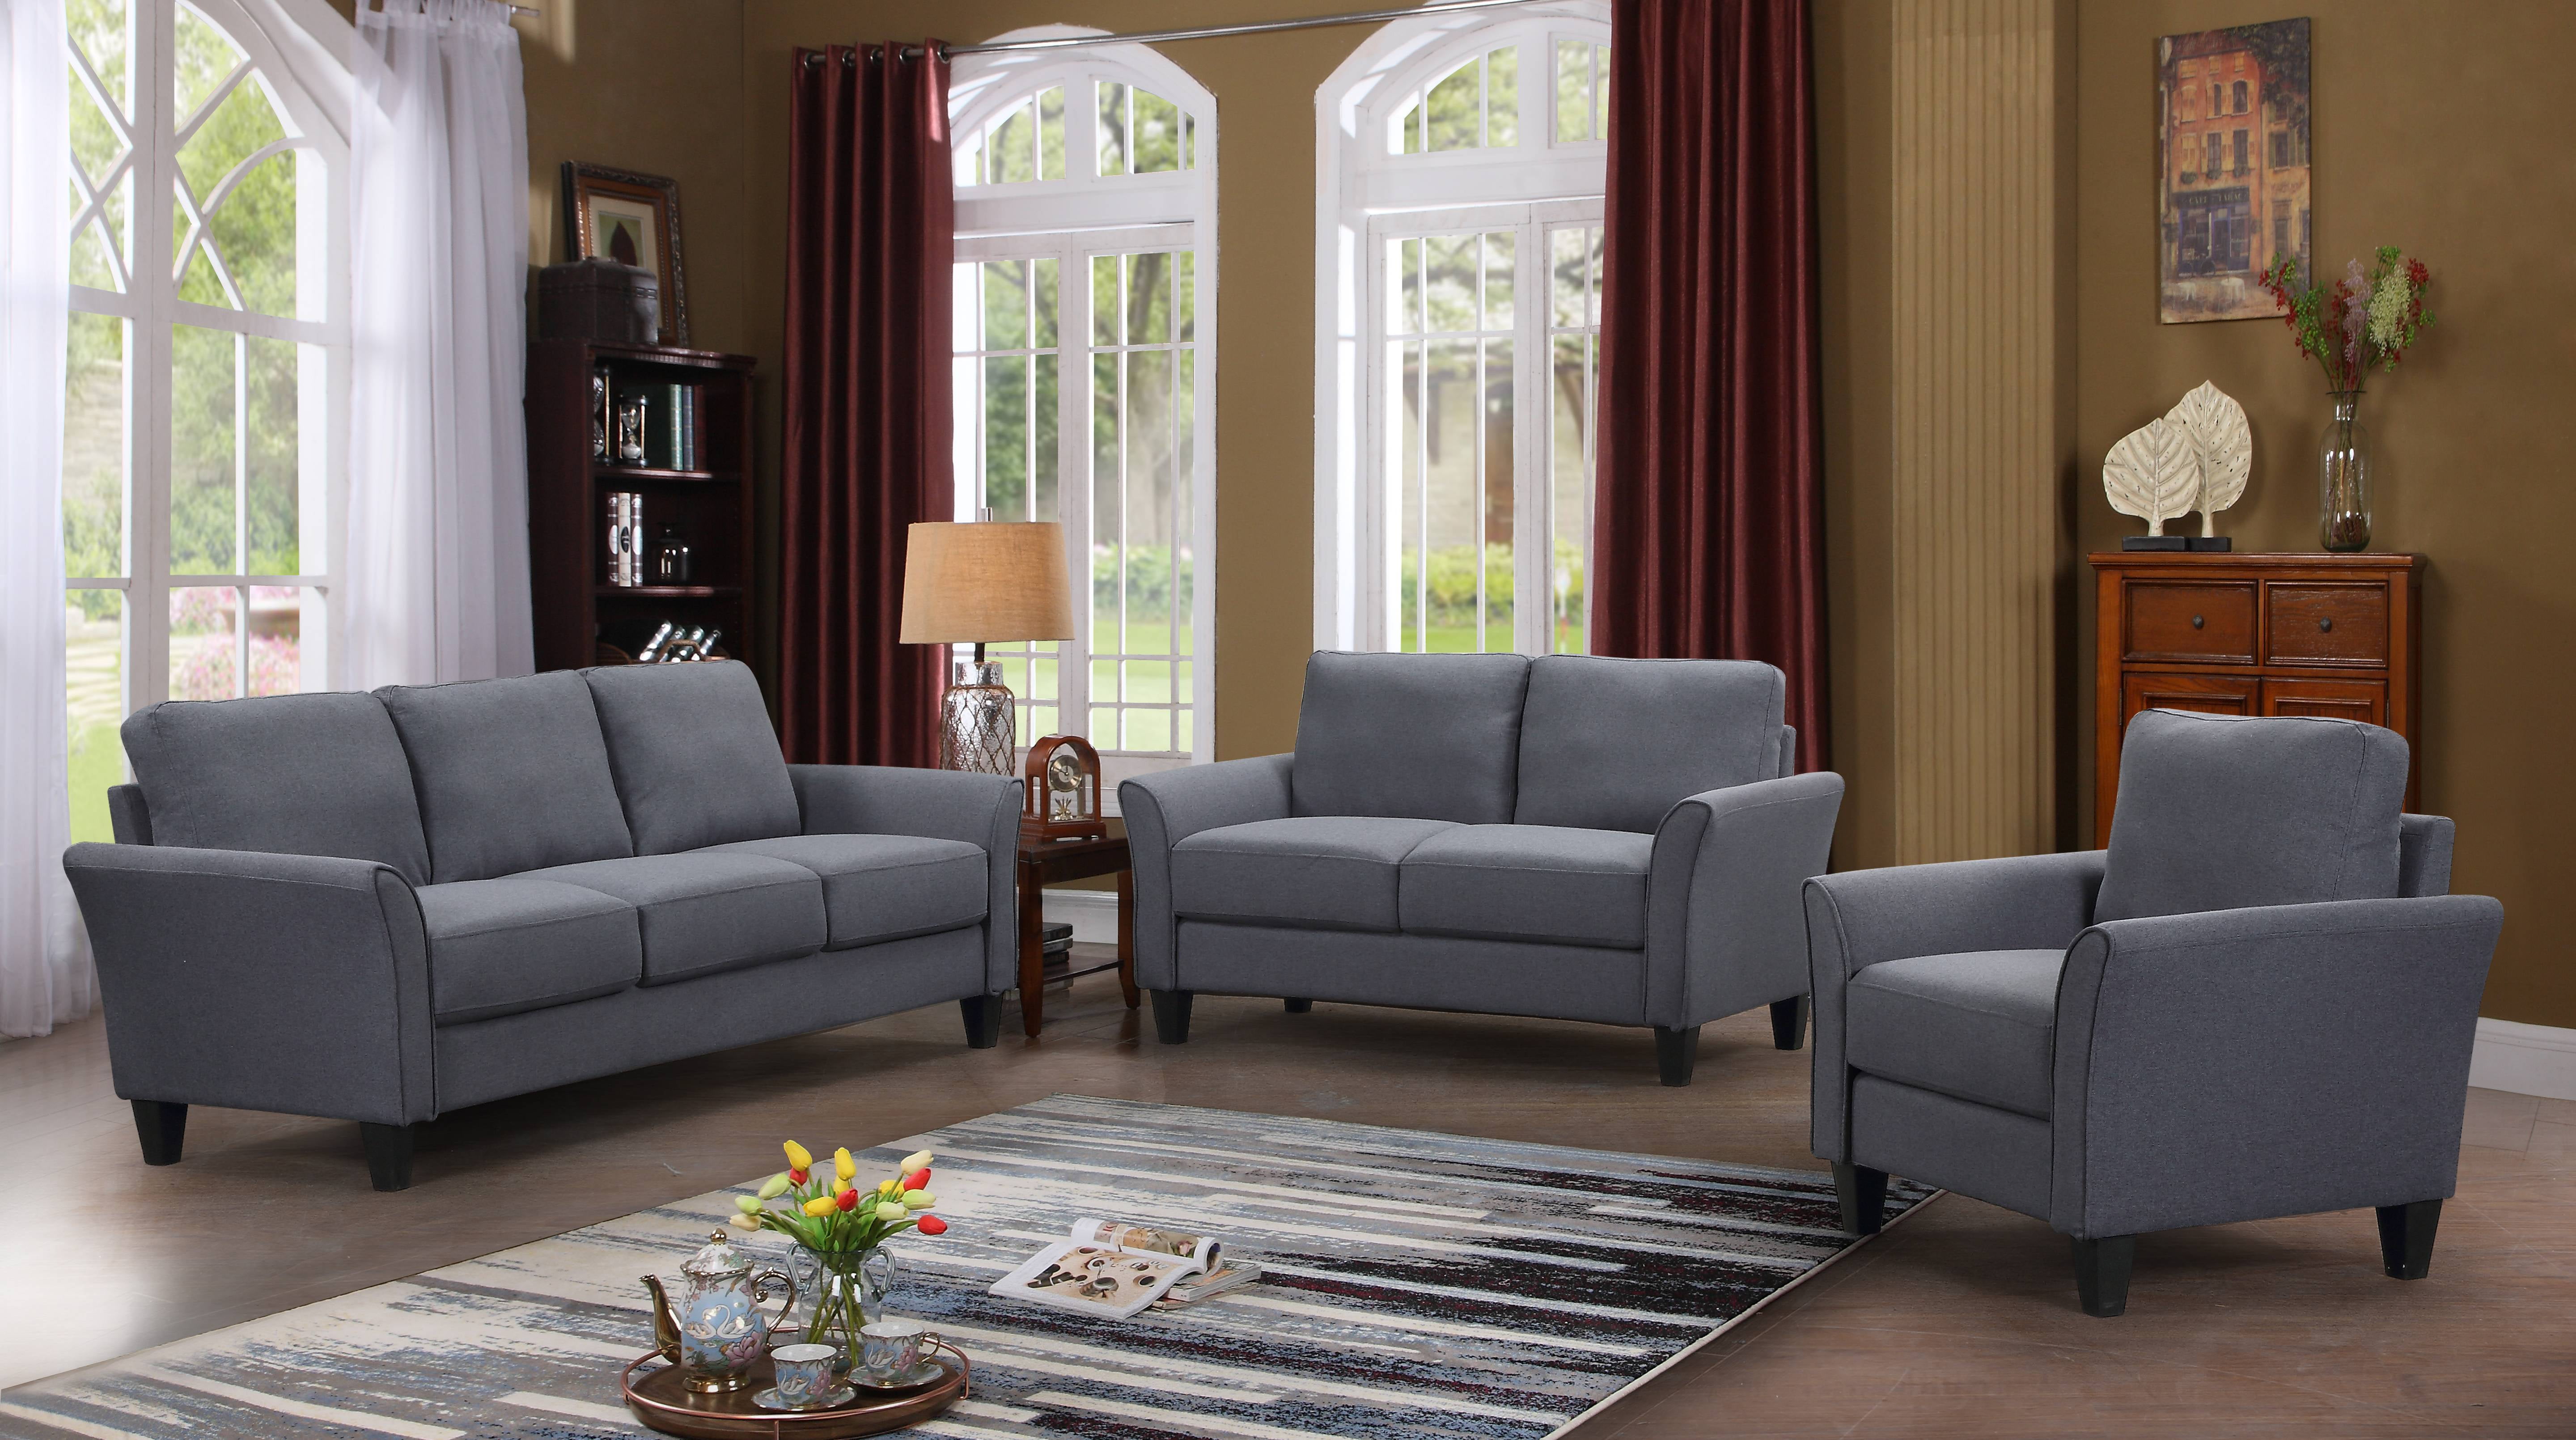 3 Piece Sectional Couch Living Room Furniture Sofa With Removable